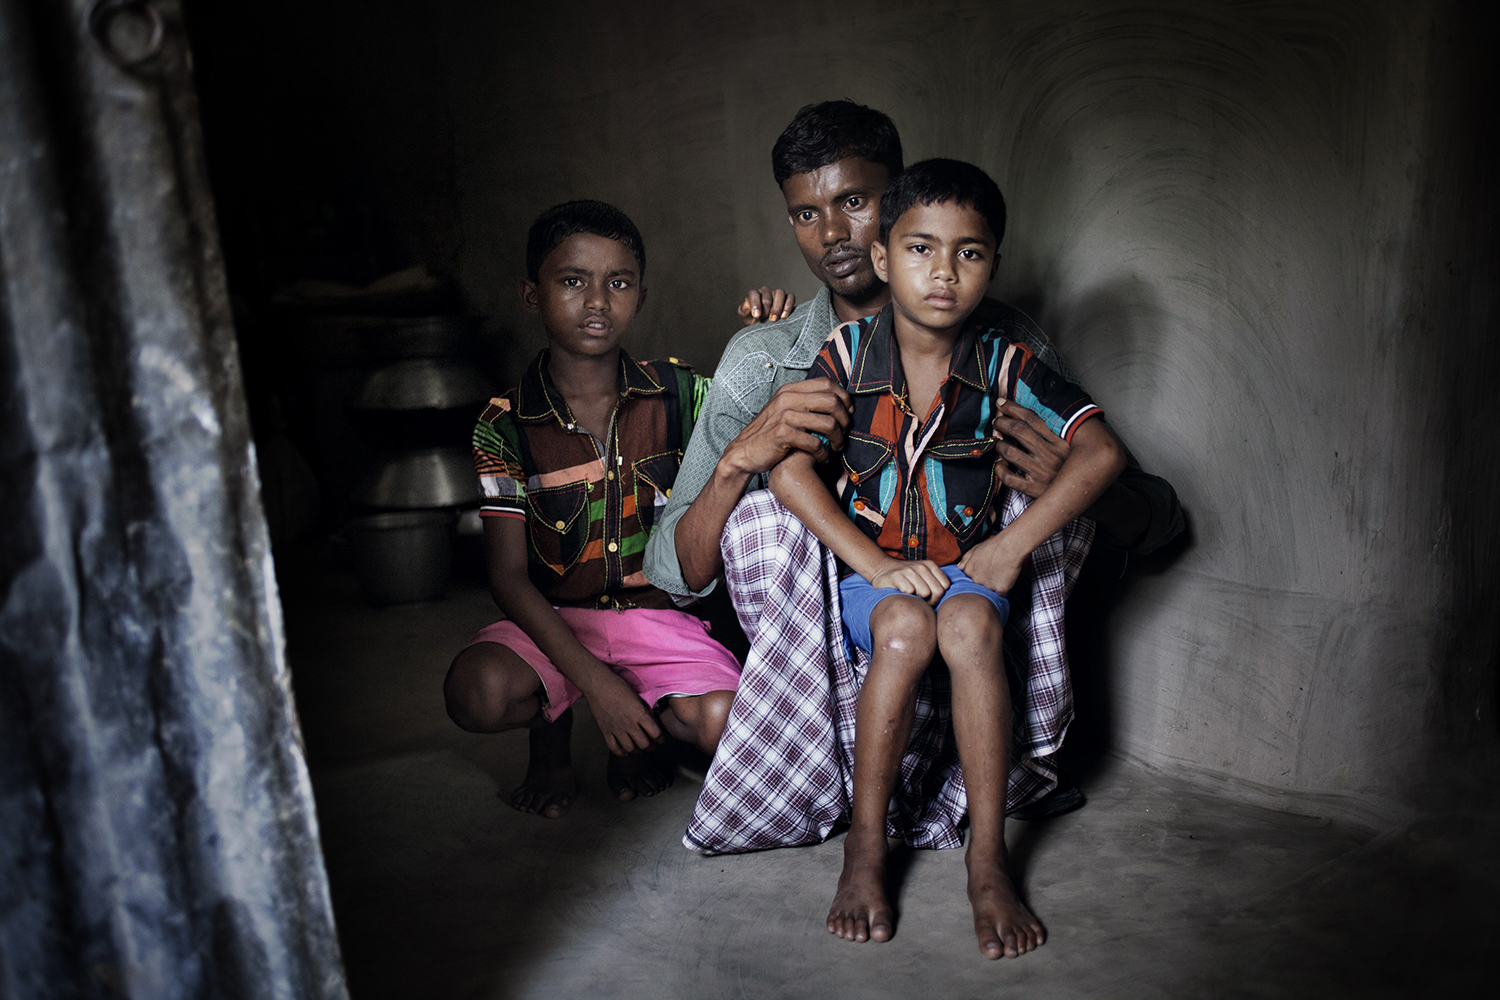 June 2, 2013. Parvej, 7, and Palash, 5, sons of missing worker Rehana, and her husband Jahedul at their home in Joypur Hat, Bangladesh.